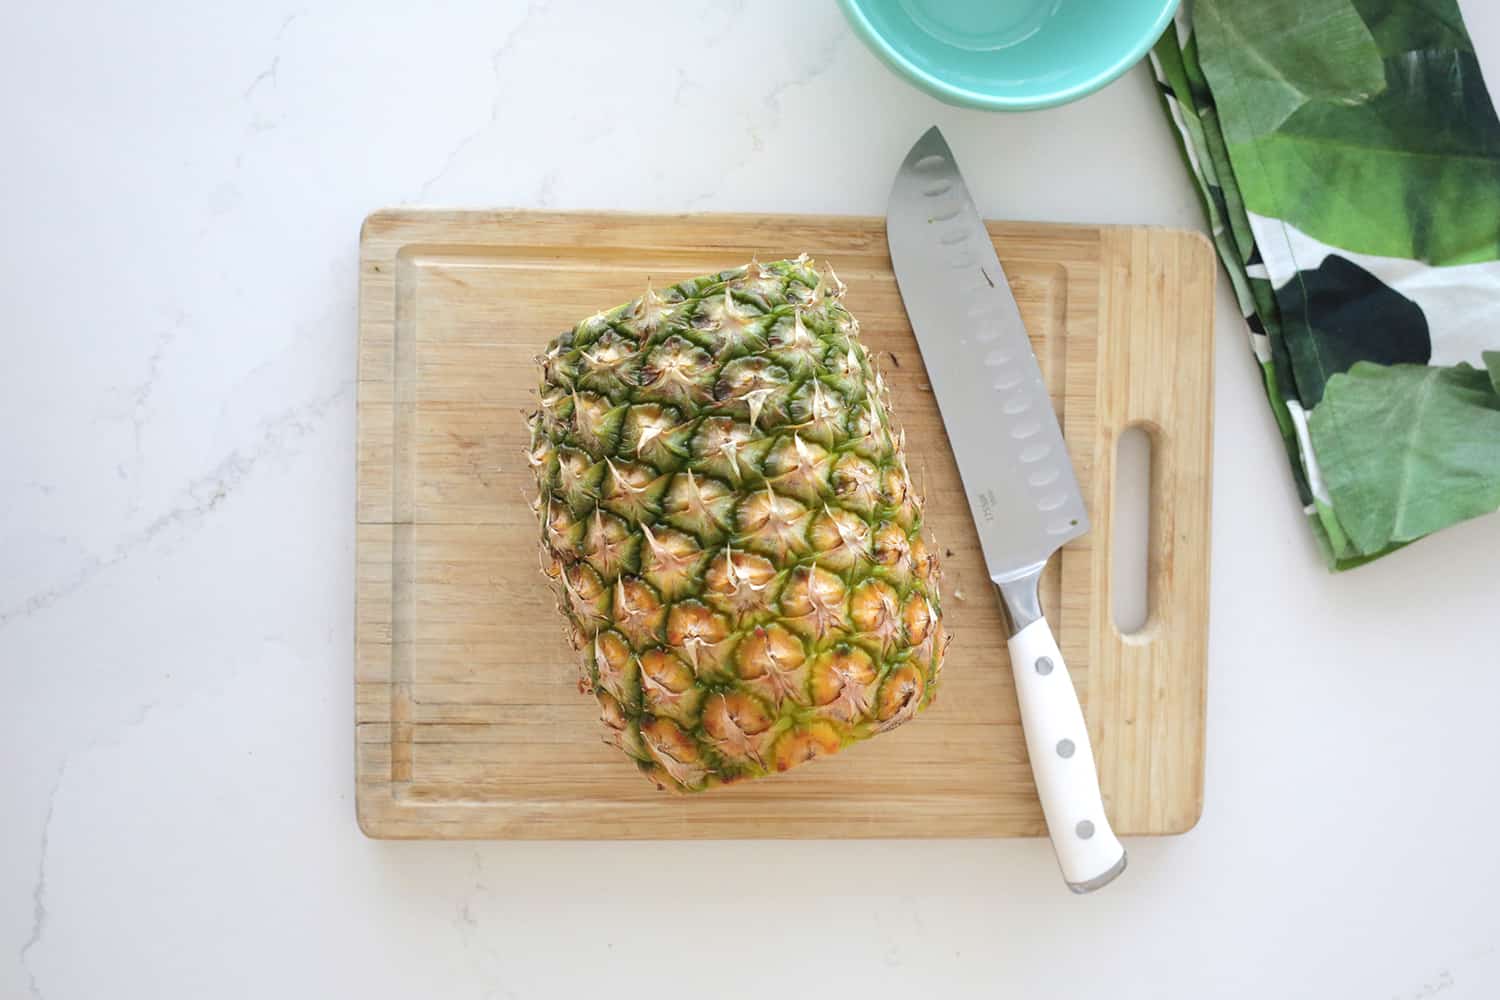 pineapple with bottom and top cut off